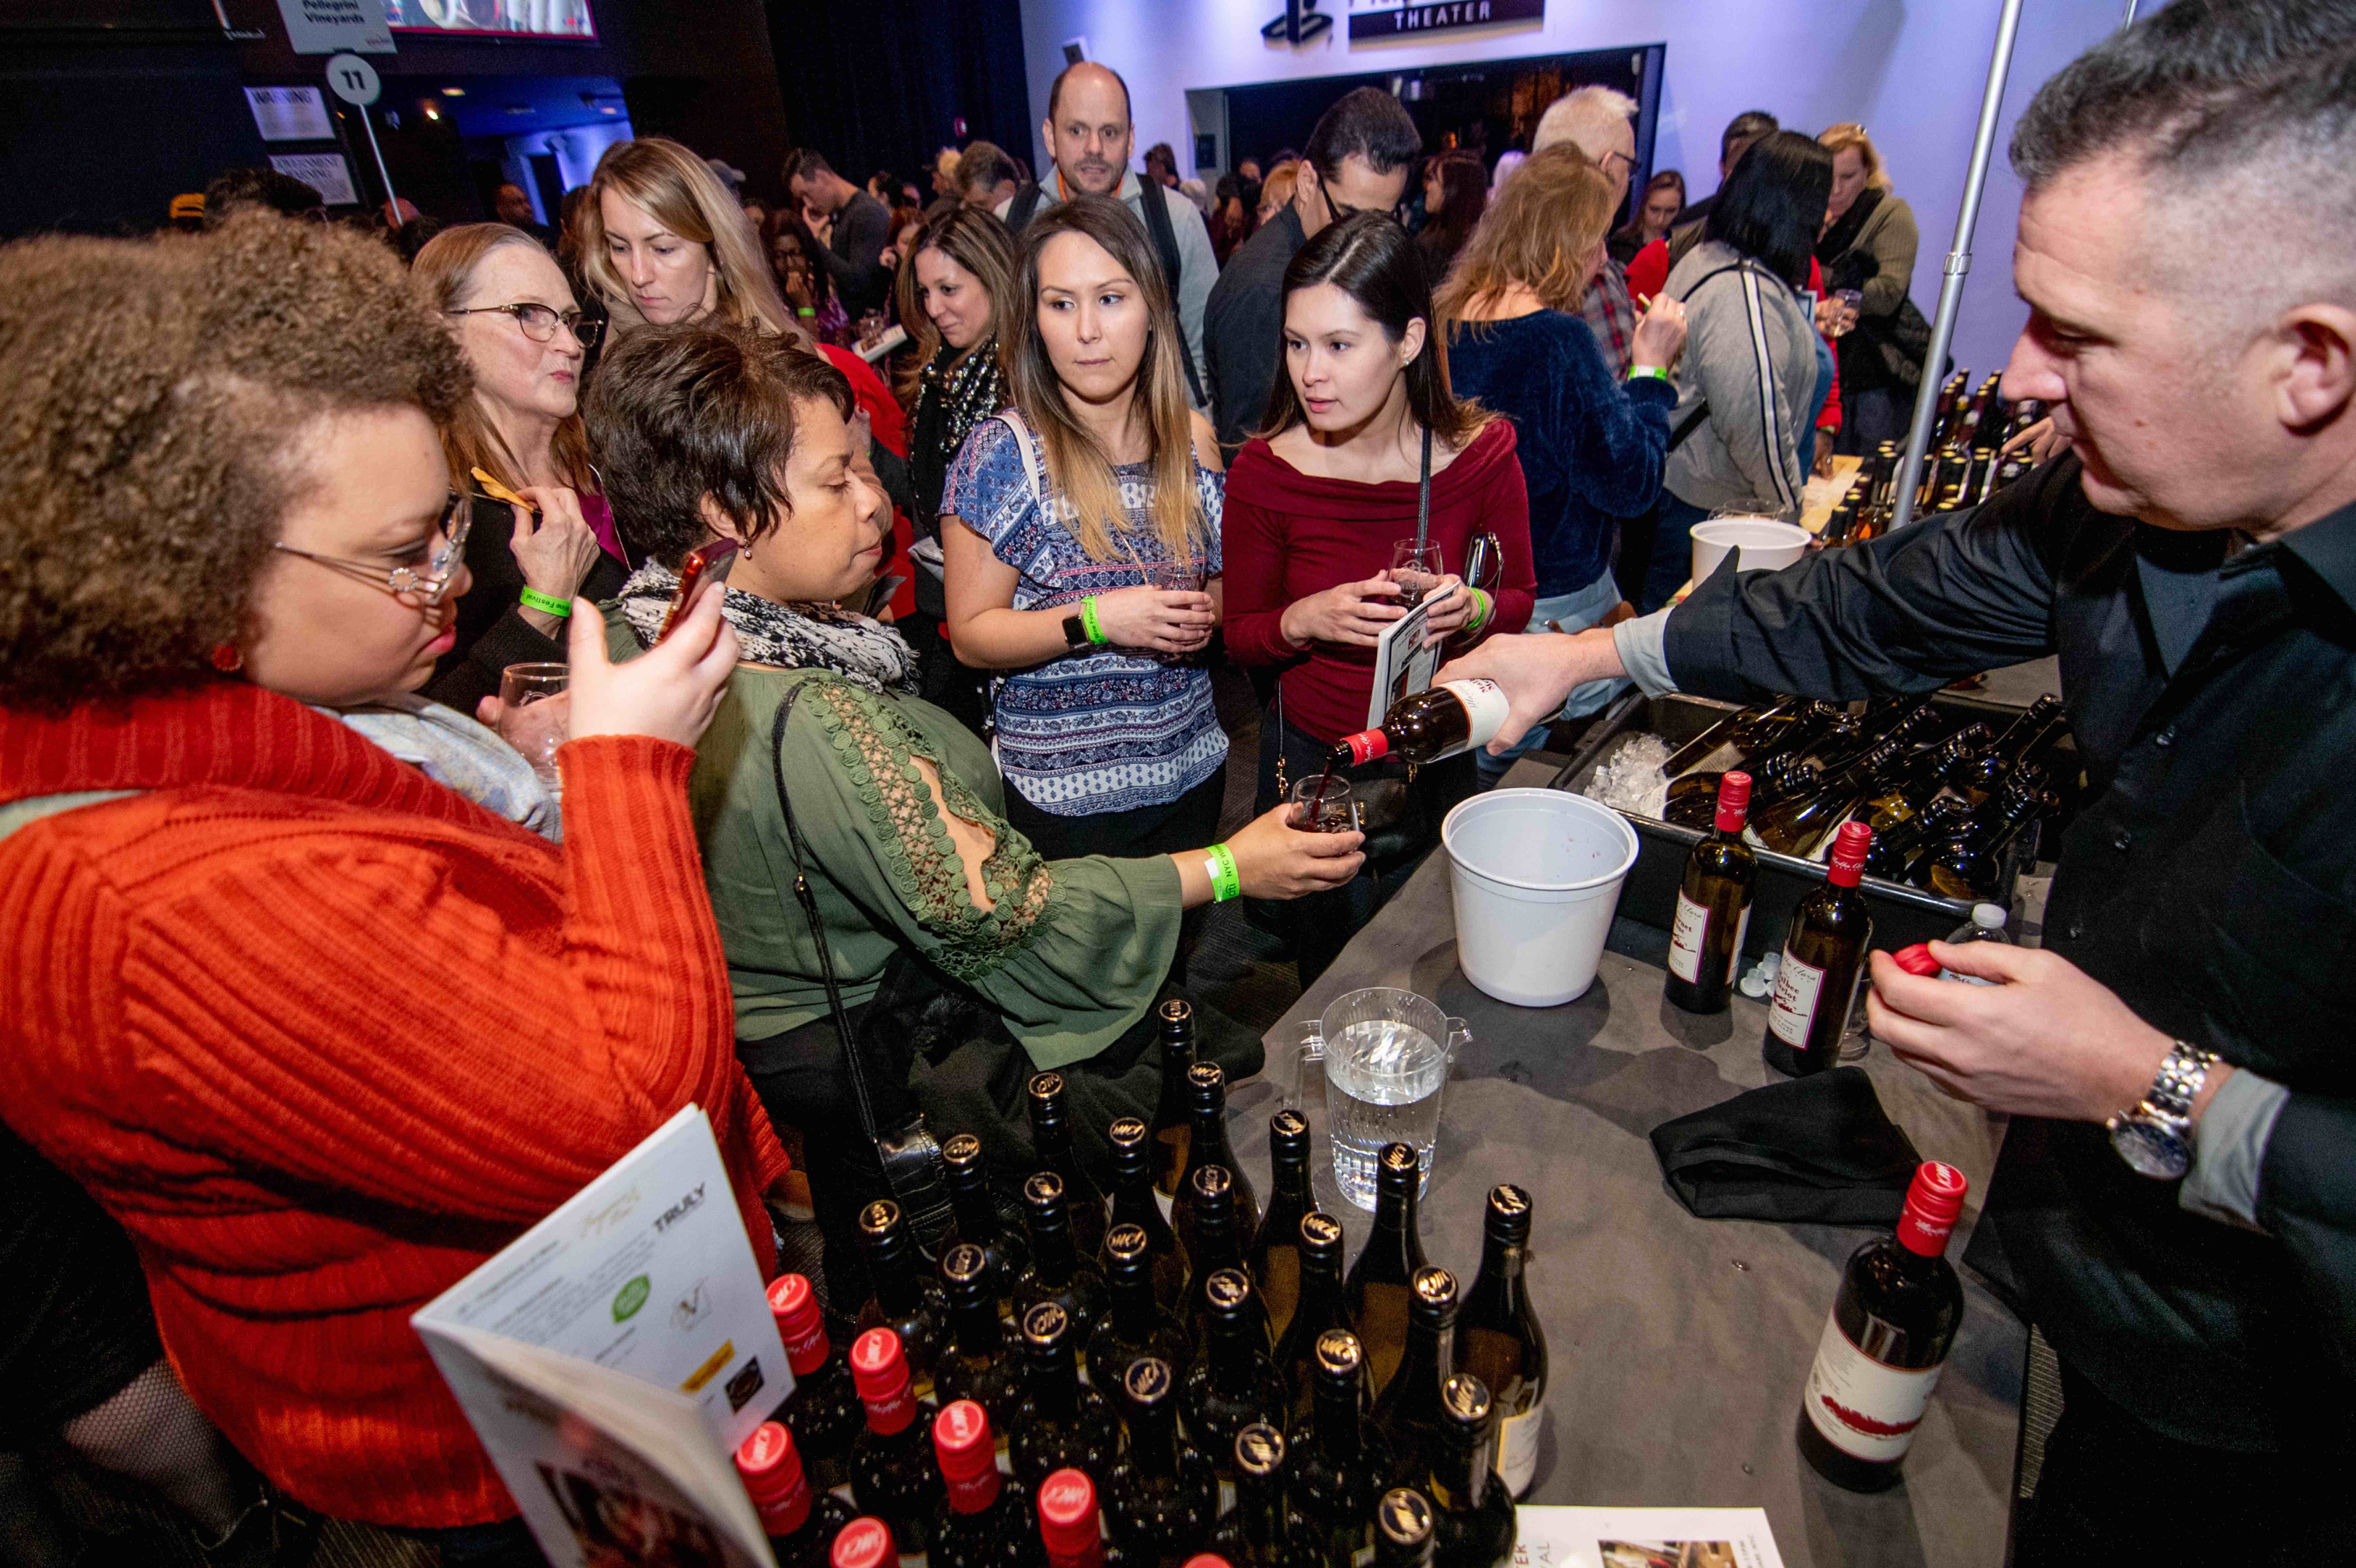 The NYC Winter Wine Festival presented by Citi takes place Sat., March 7 at Webster Hall in Greenwich Village. Find info & tickets at NewYorkWineEvents.com